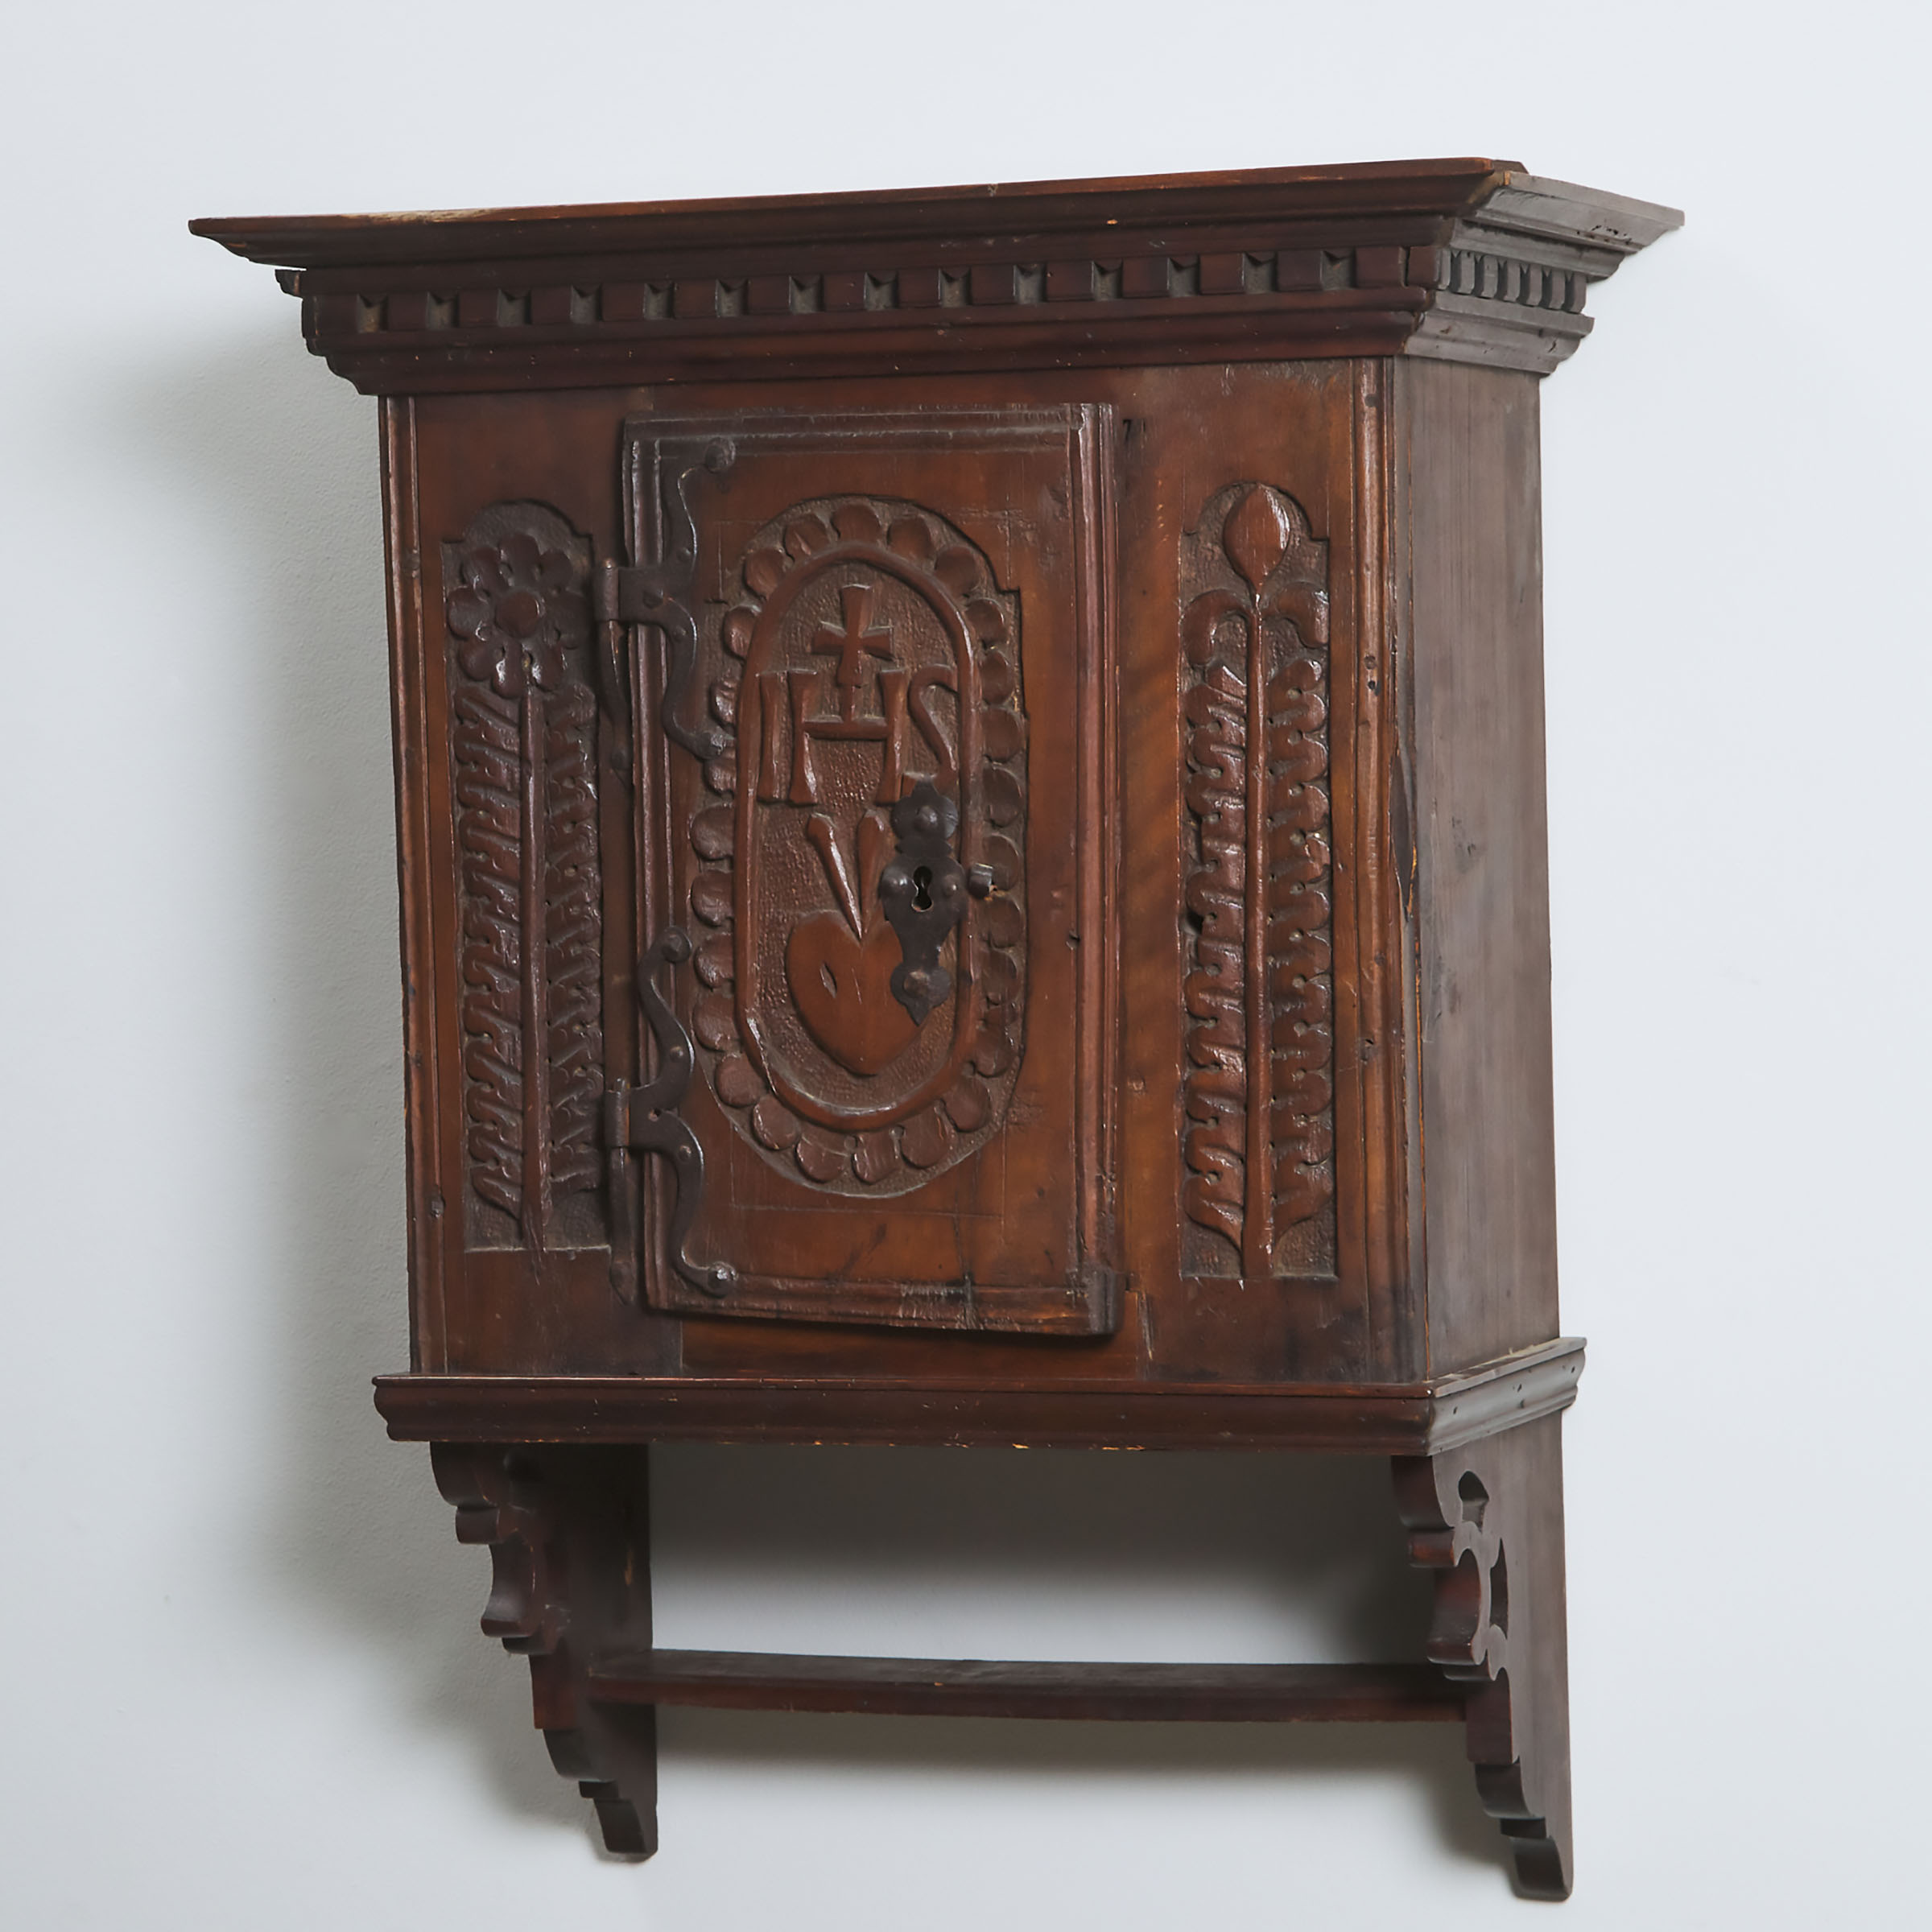 Continental Oak Wall Hanging Tabernacle, 18th/19th century